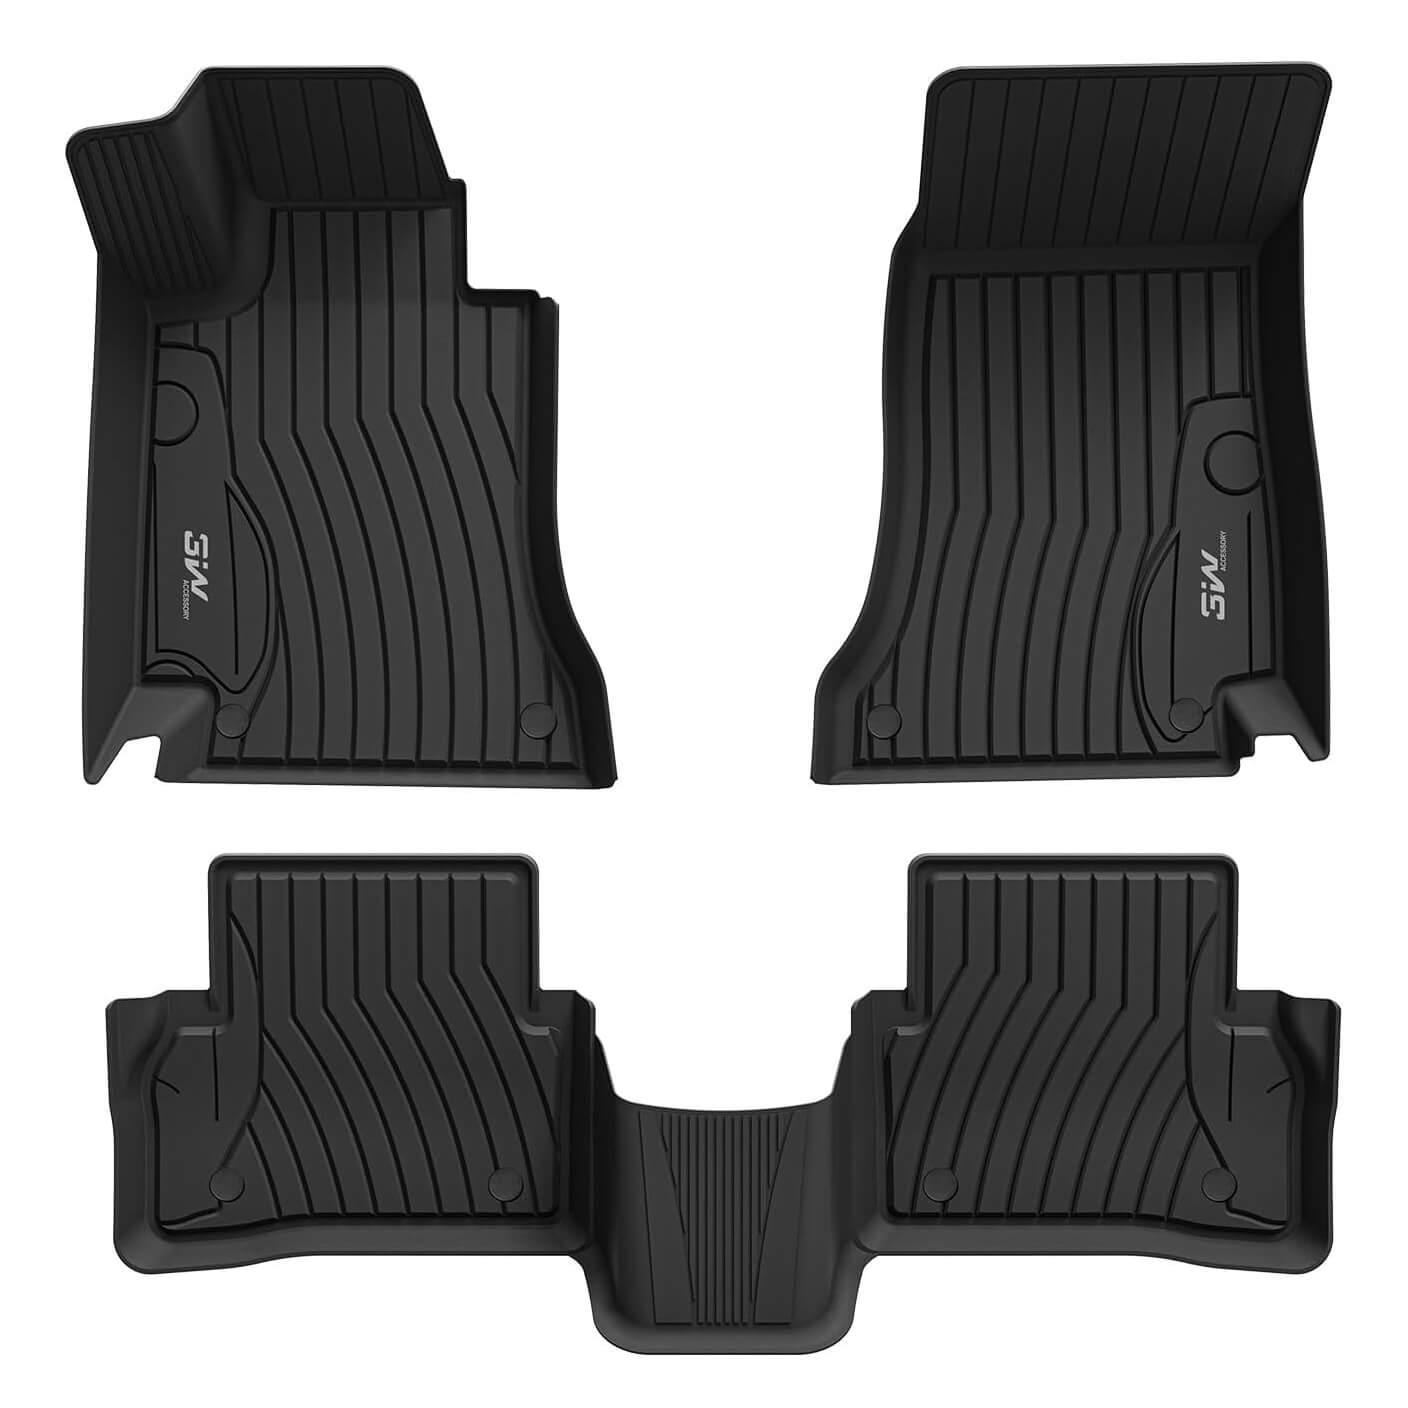 3W Mercedes-Benz C-Class 2015-2021 (for Sedan Only) Custom Floor Mats TPE Material & All-Weather Protection Vehicles & Parts 3w 2015-2021 C-Class 2015-2021 1st&2nd Row Mats